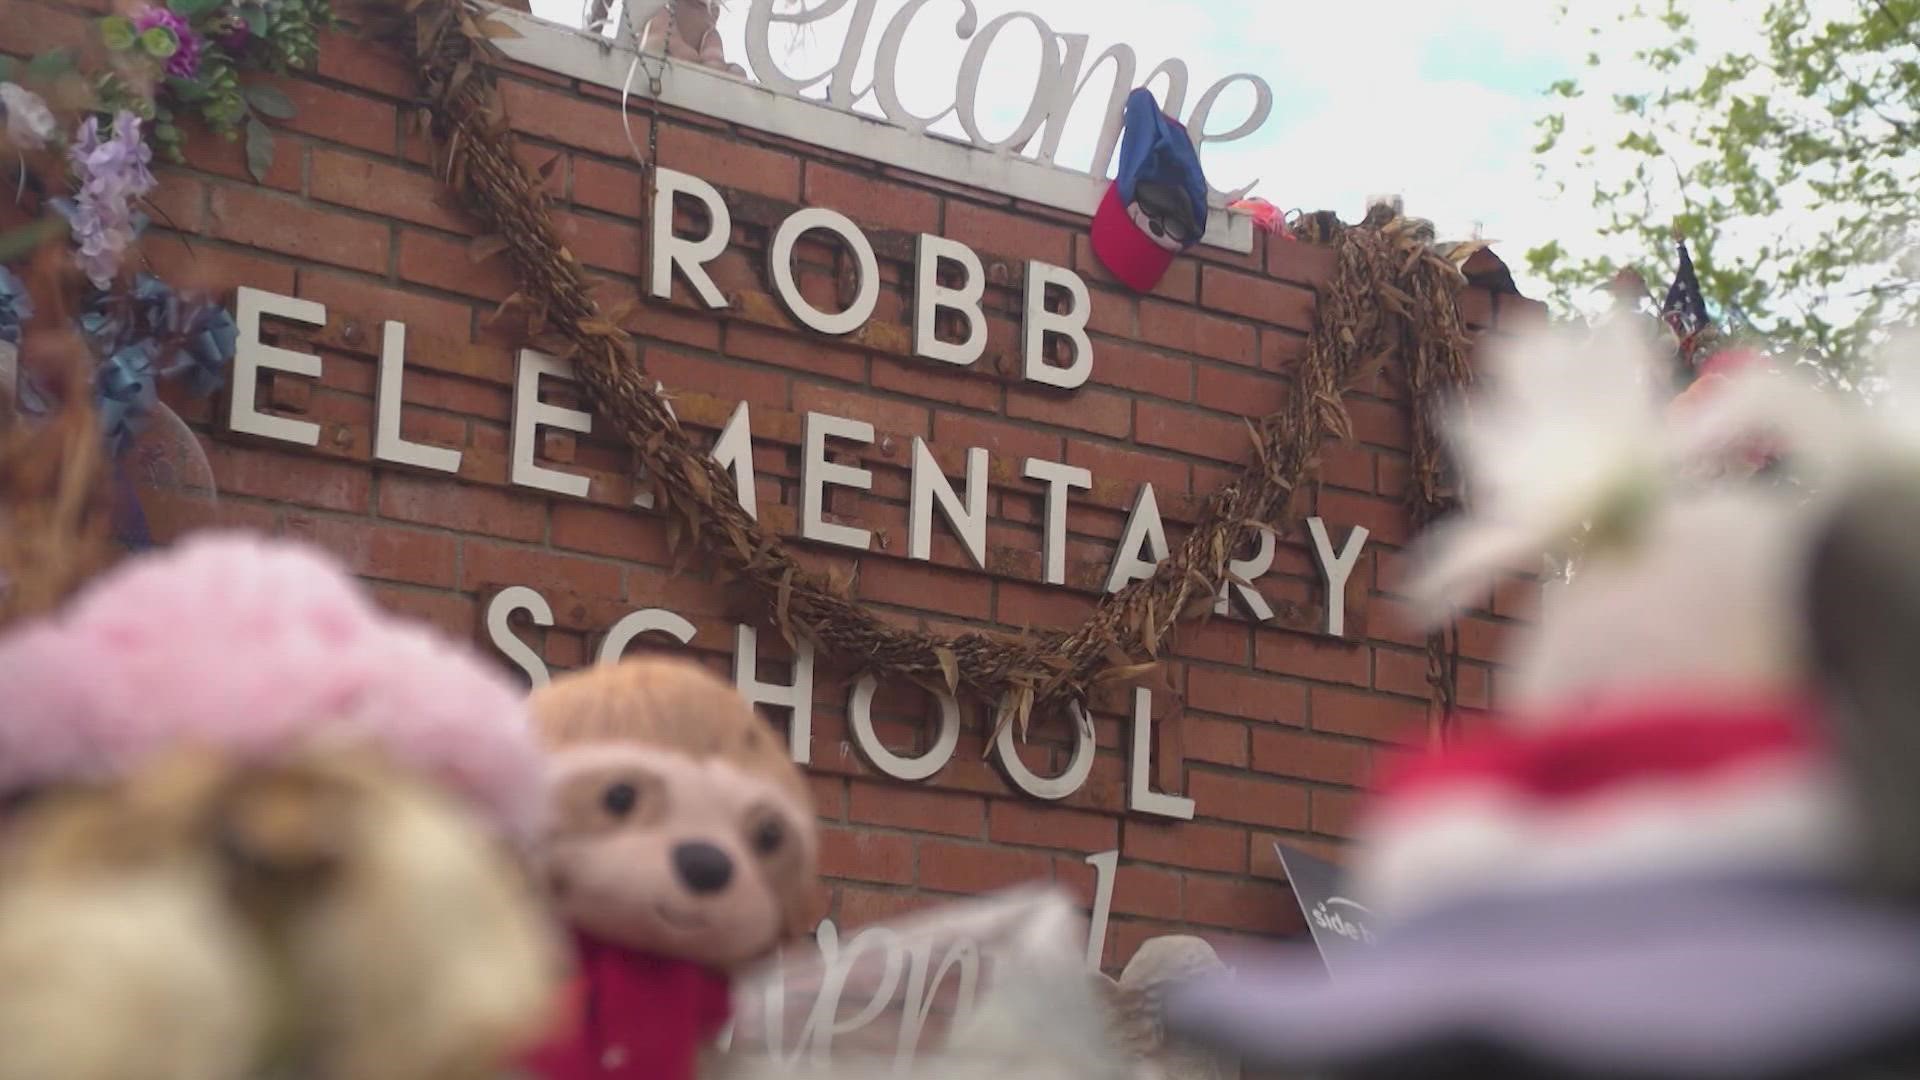 The lawsuit asserts that Robb Elementary was under-prepared even after receiving funds to improve school safety following the deadly shooting at Santa Fe High.